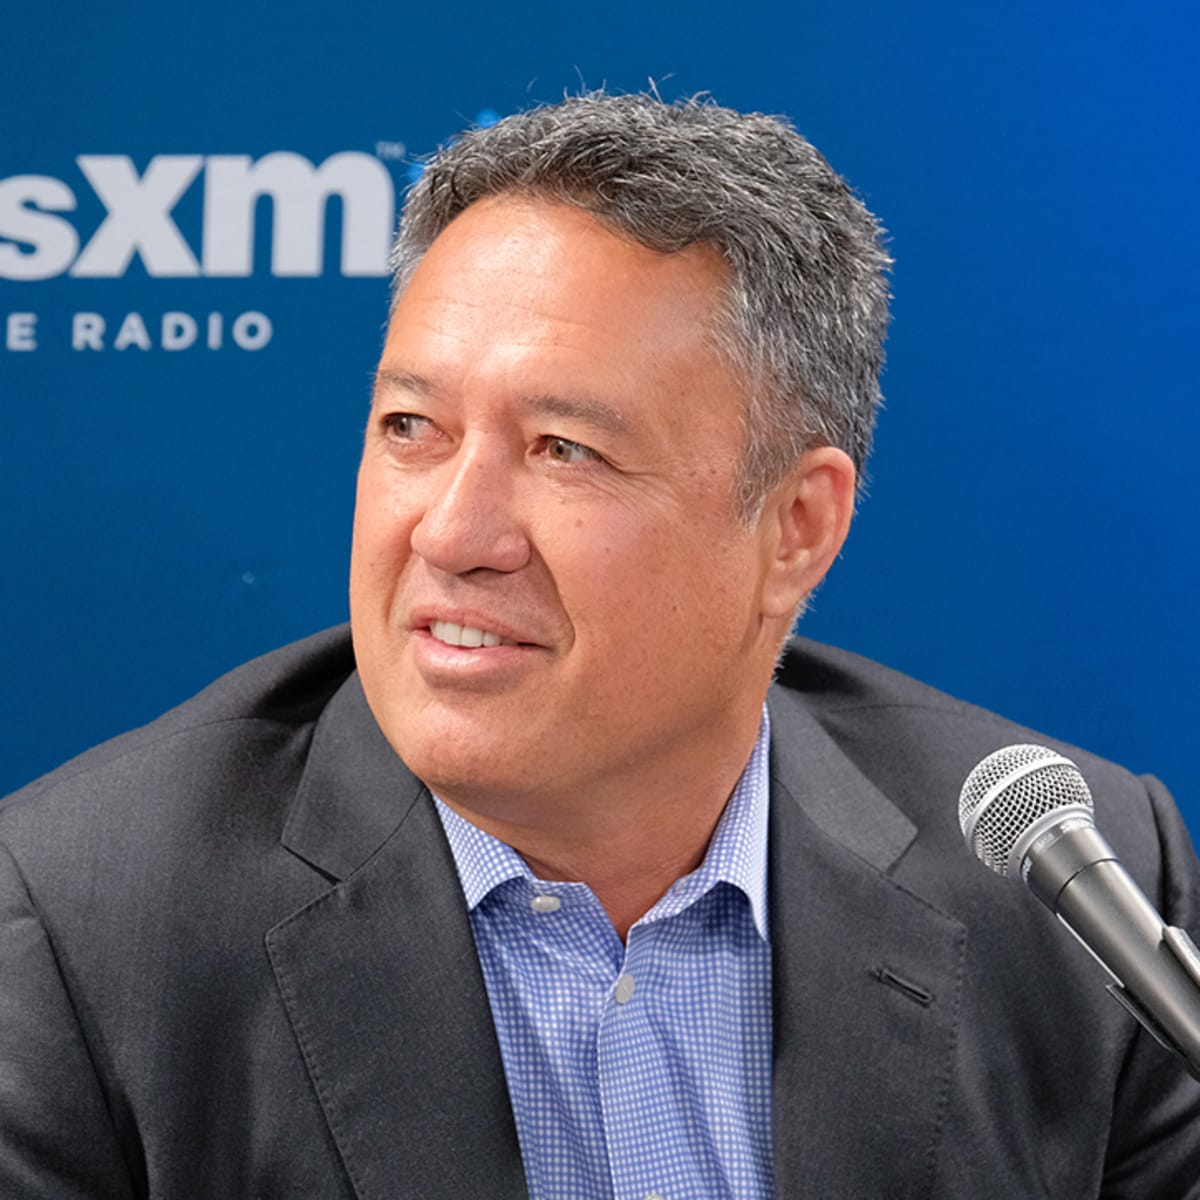 Ron Darling Bio, Wiki, Age, Wife, Hall of Fame, Family, Children